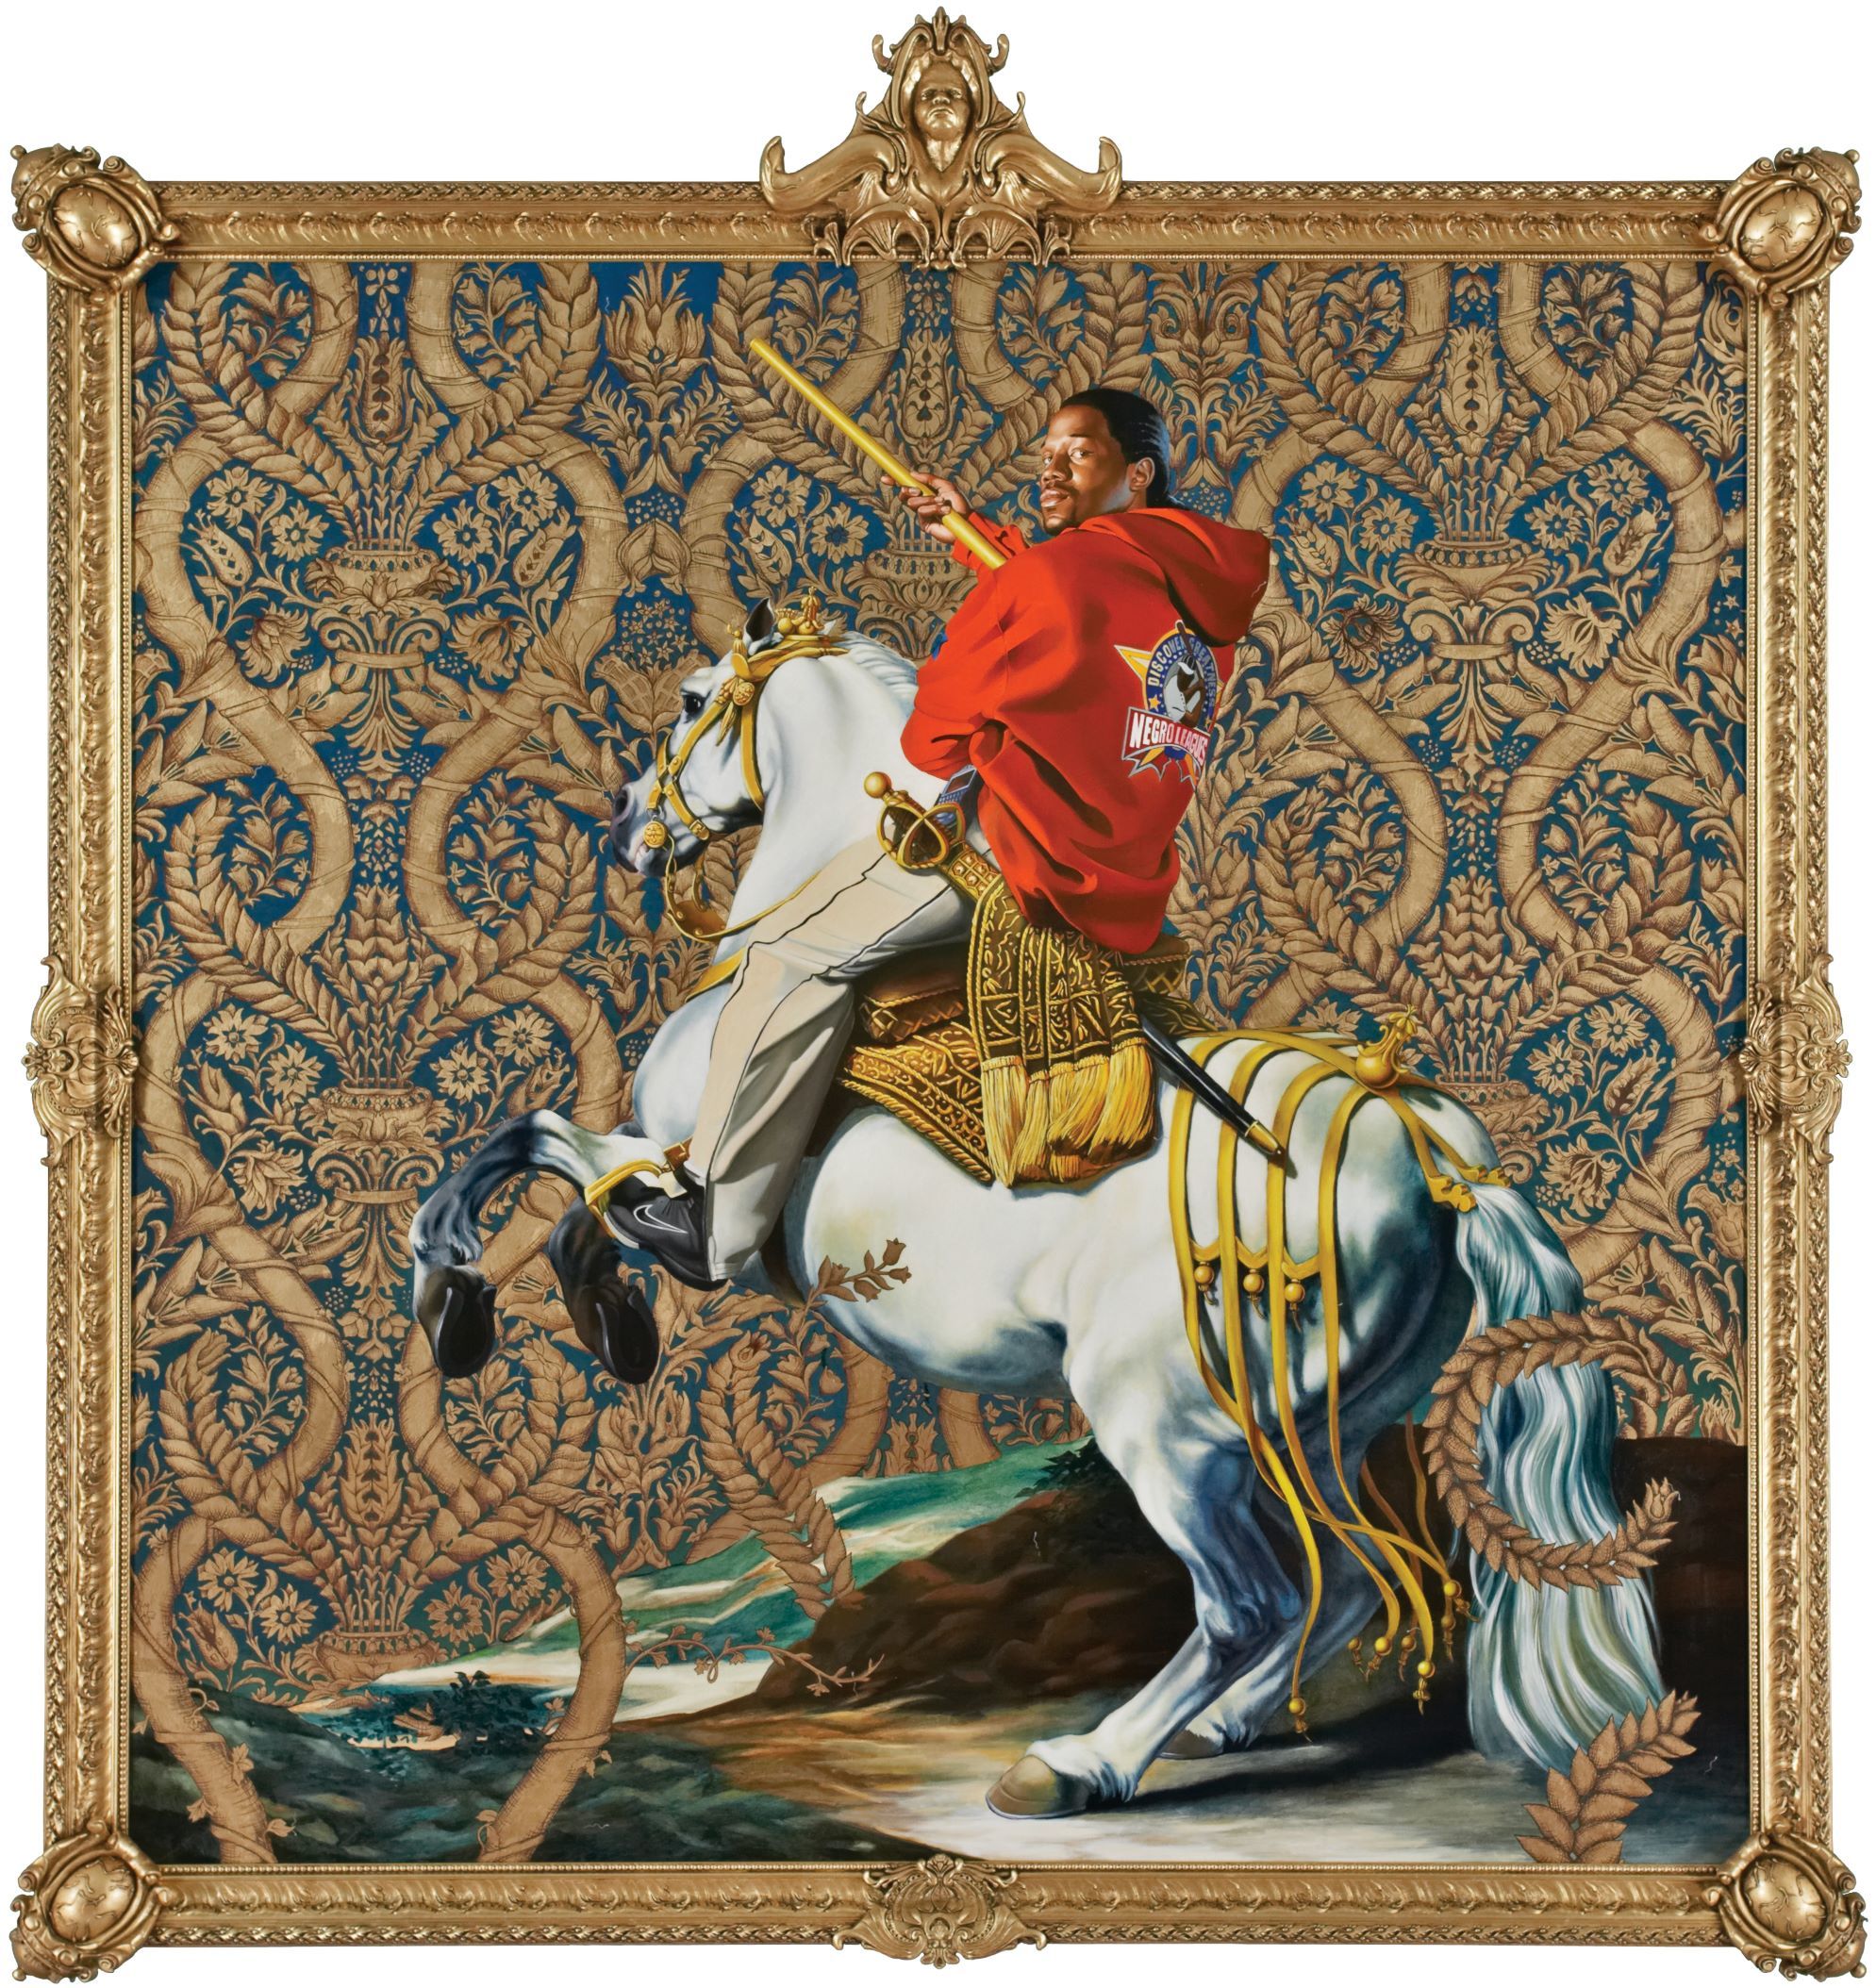 Kehinde Wiley, “Equestrian Portrait of the Count Duke Olivares,” 2005, Oil on canvas, 108 x 108 in. (274.3 x 274.3 cm), Courtesy Rubell Museum, Miami